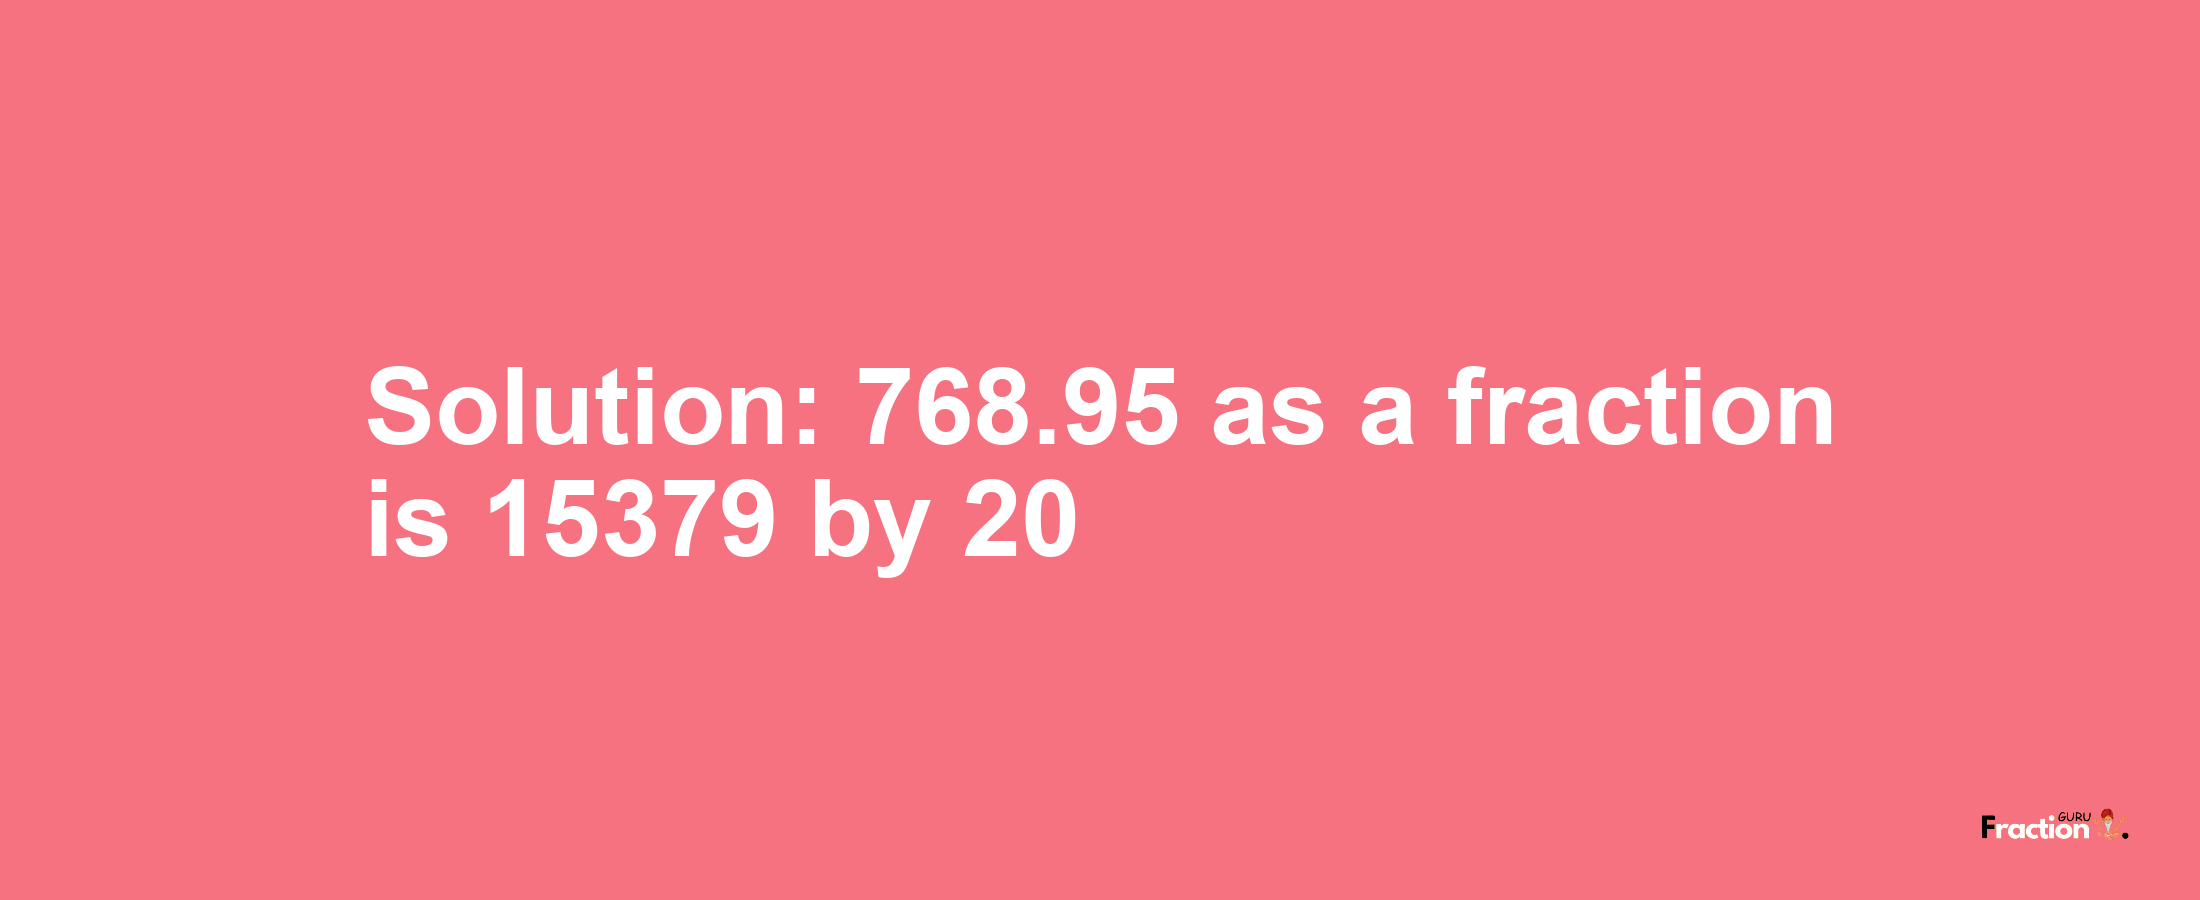 Solution:768.95 as a fraction is 15379/20